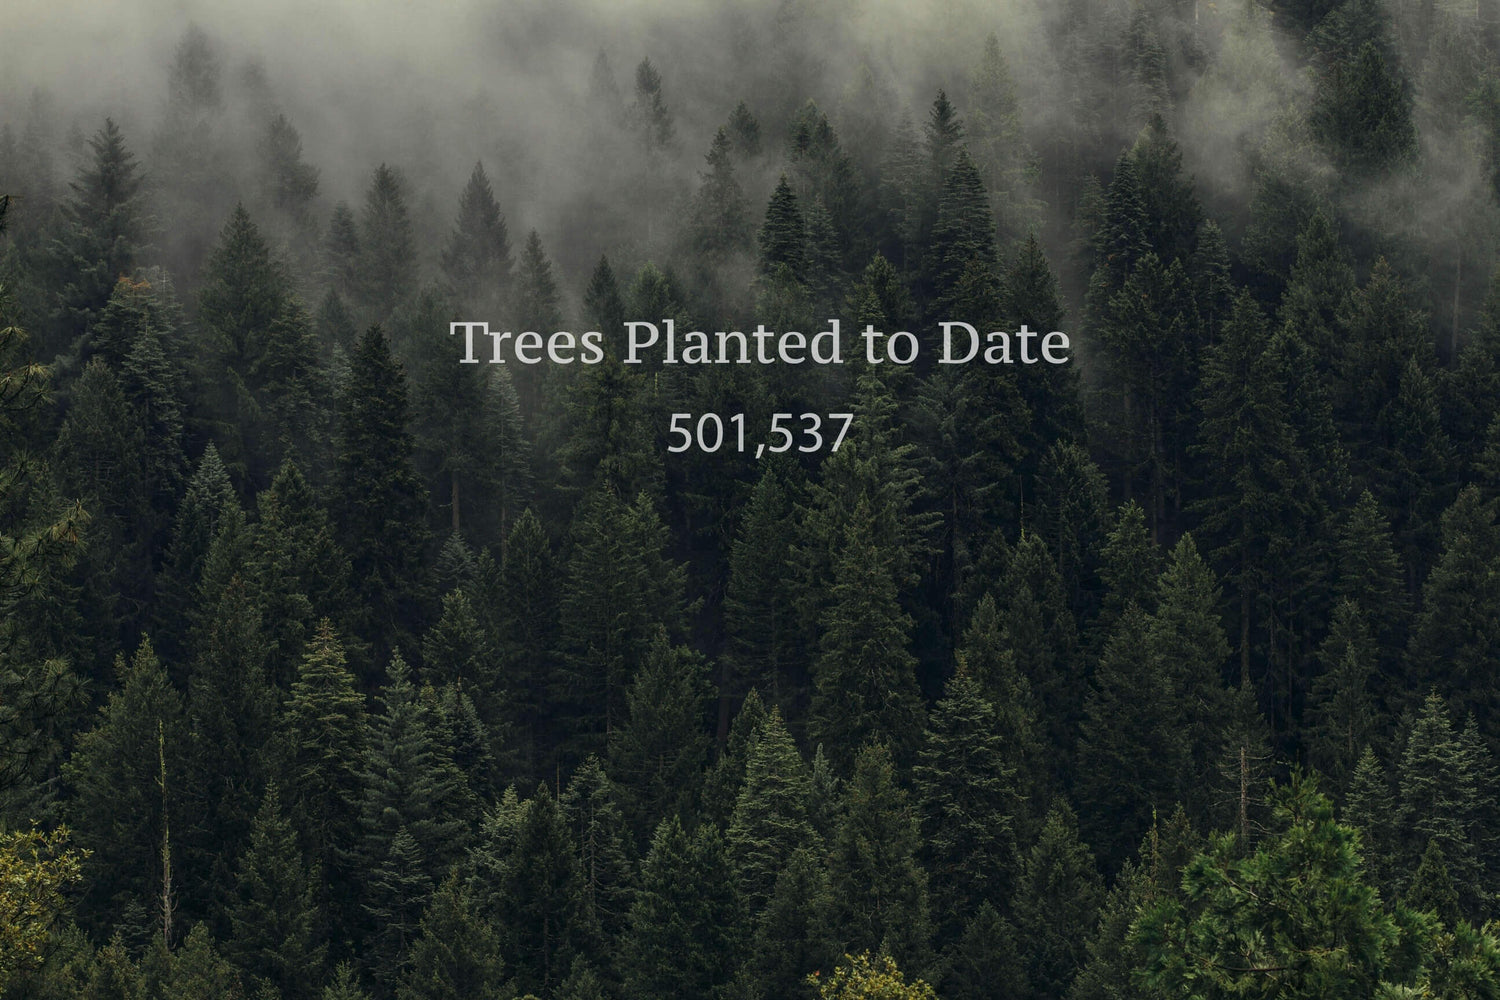 Reforestation project